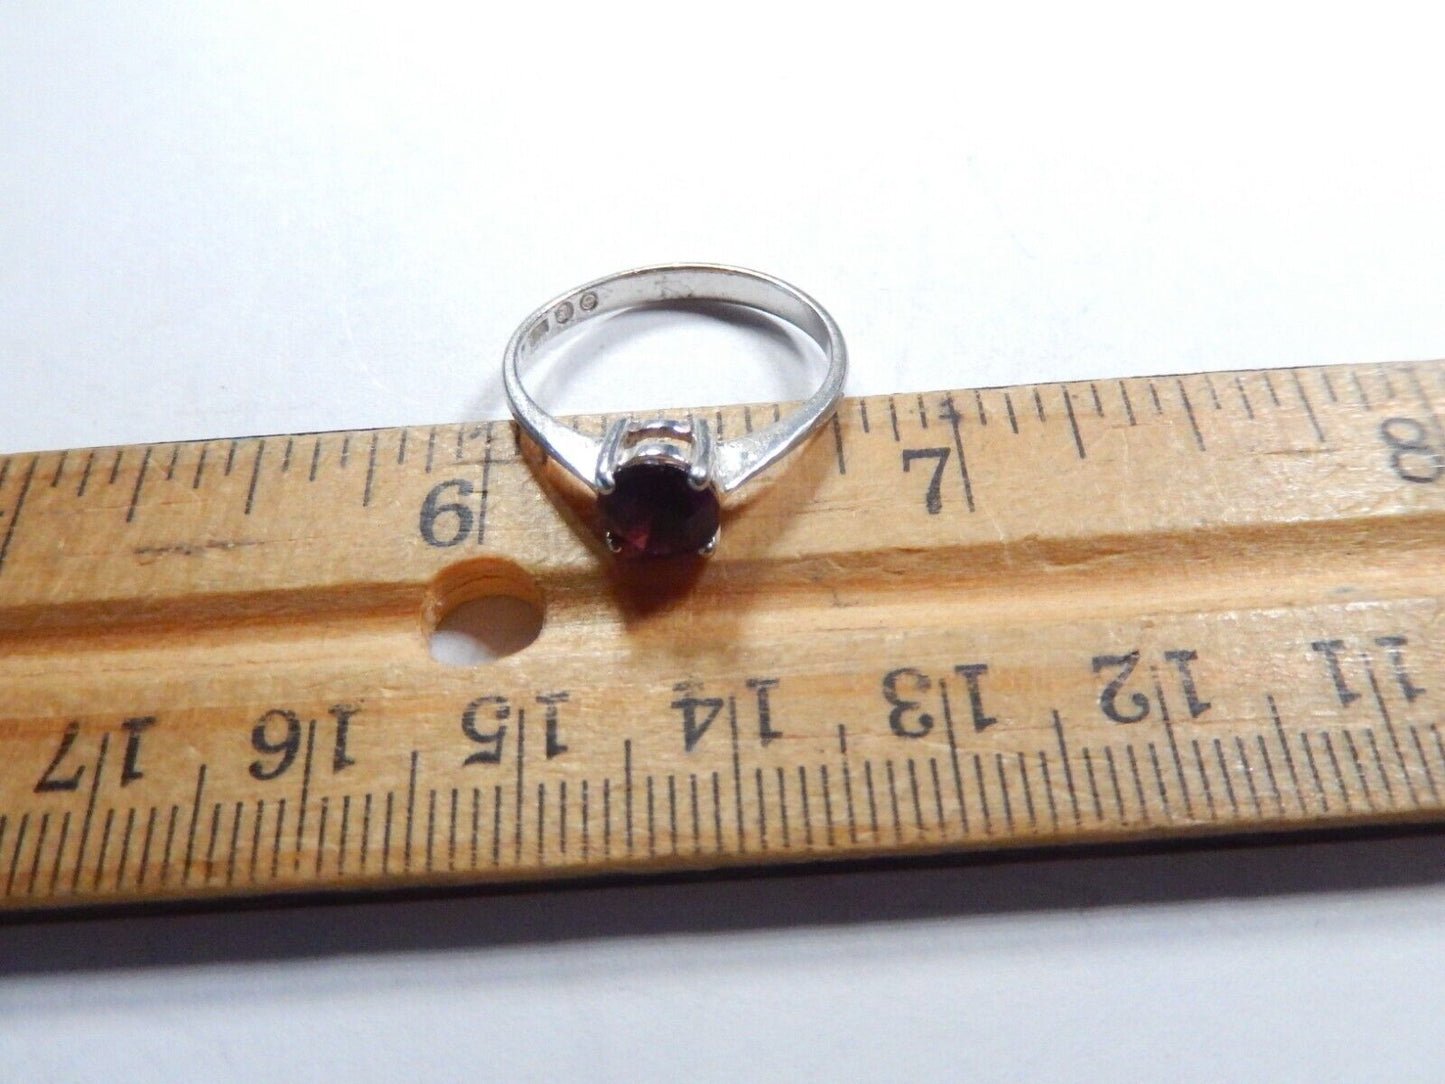 *VINTAGE* 925 Sterling Silver Amethyst Solitaire Birthstone Ring Size 7